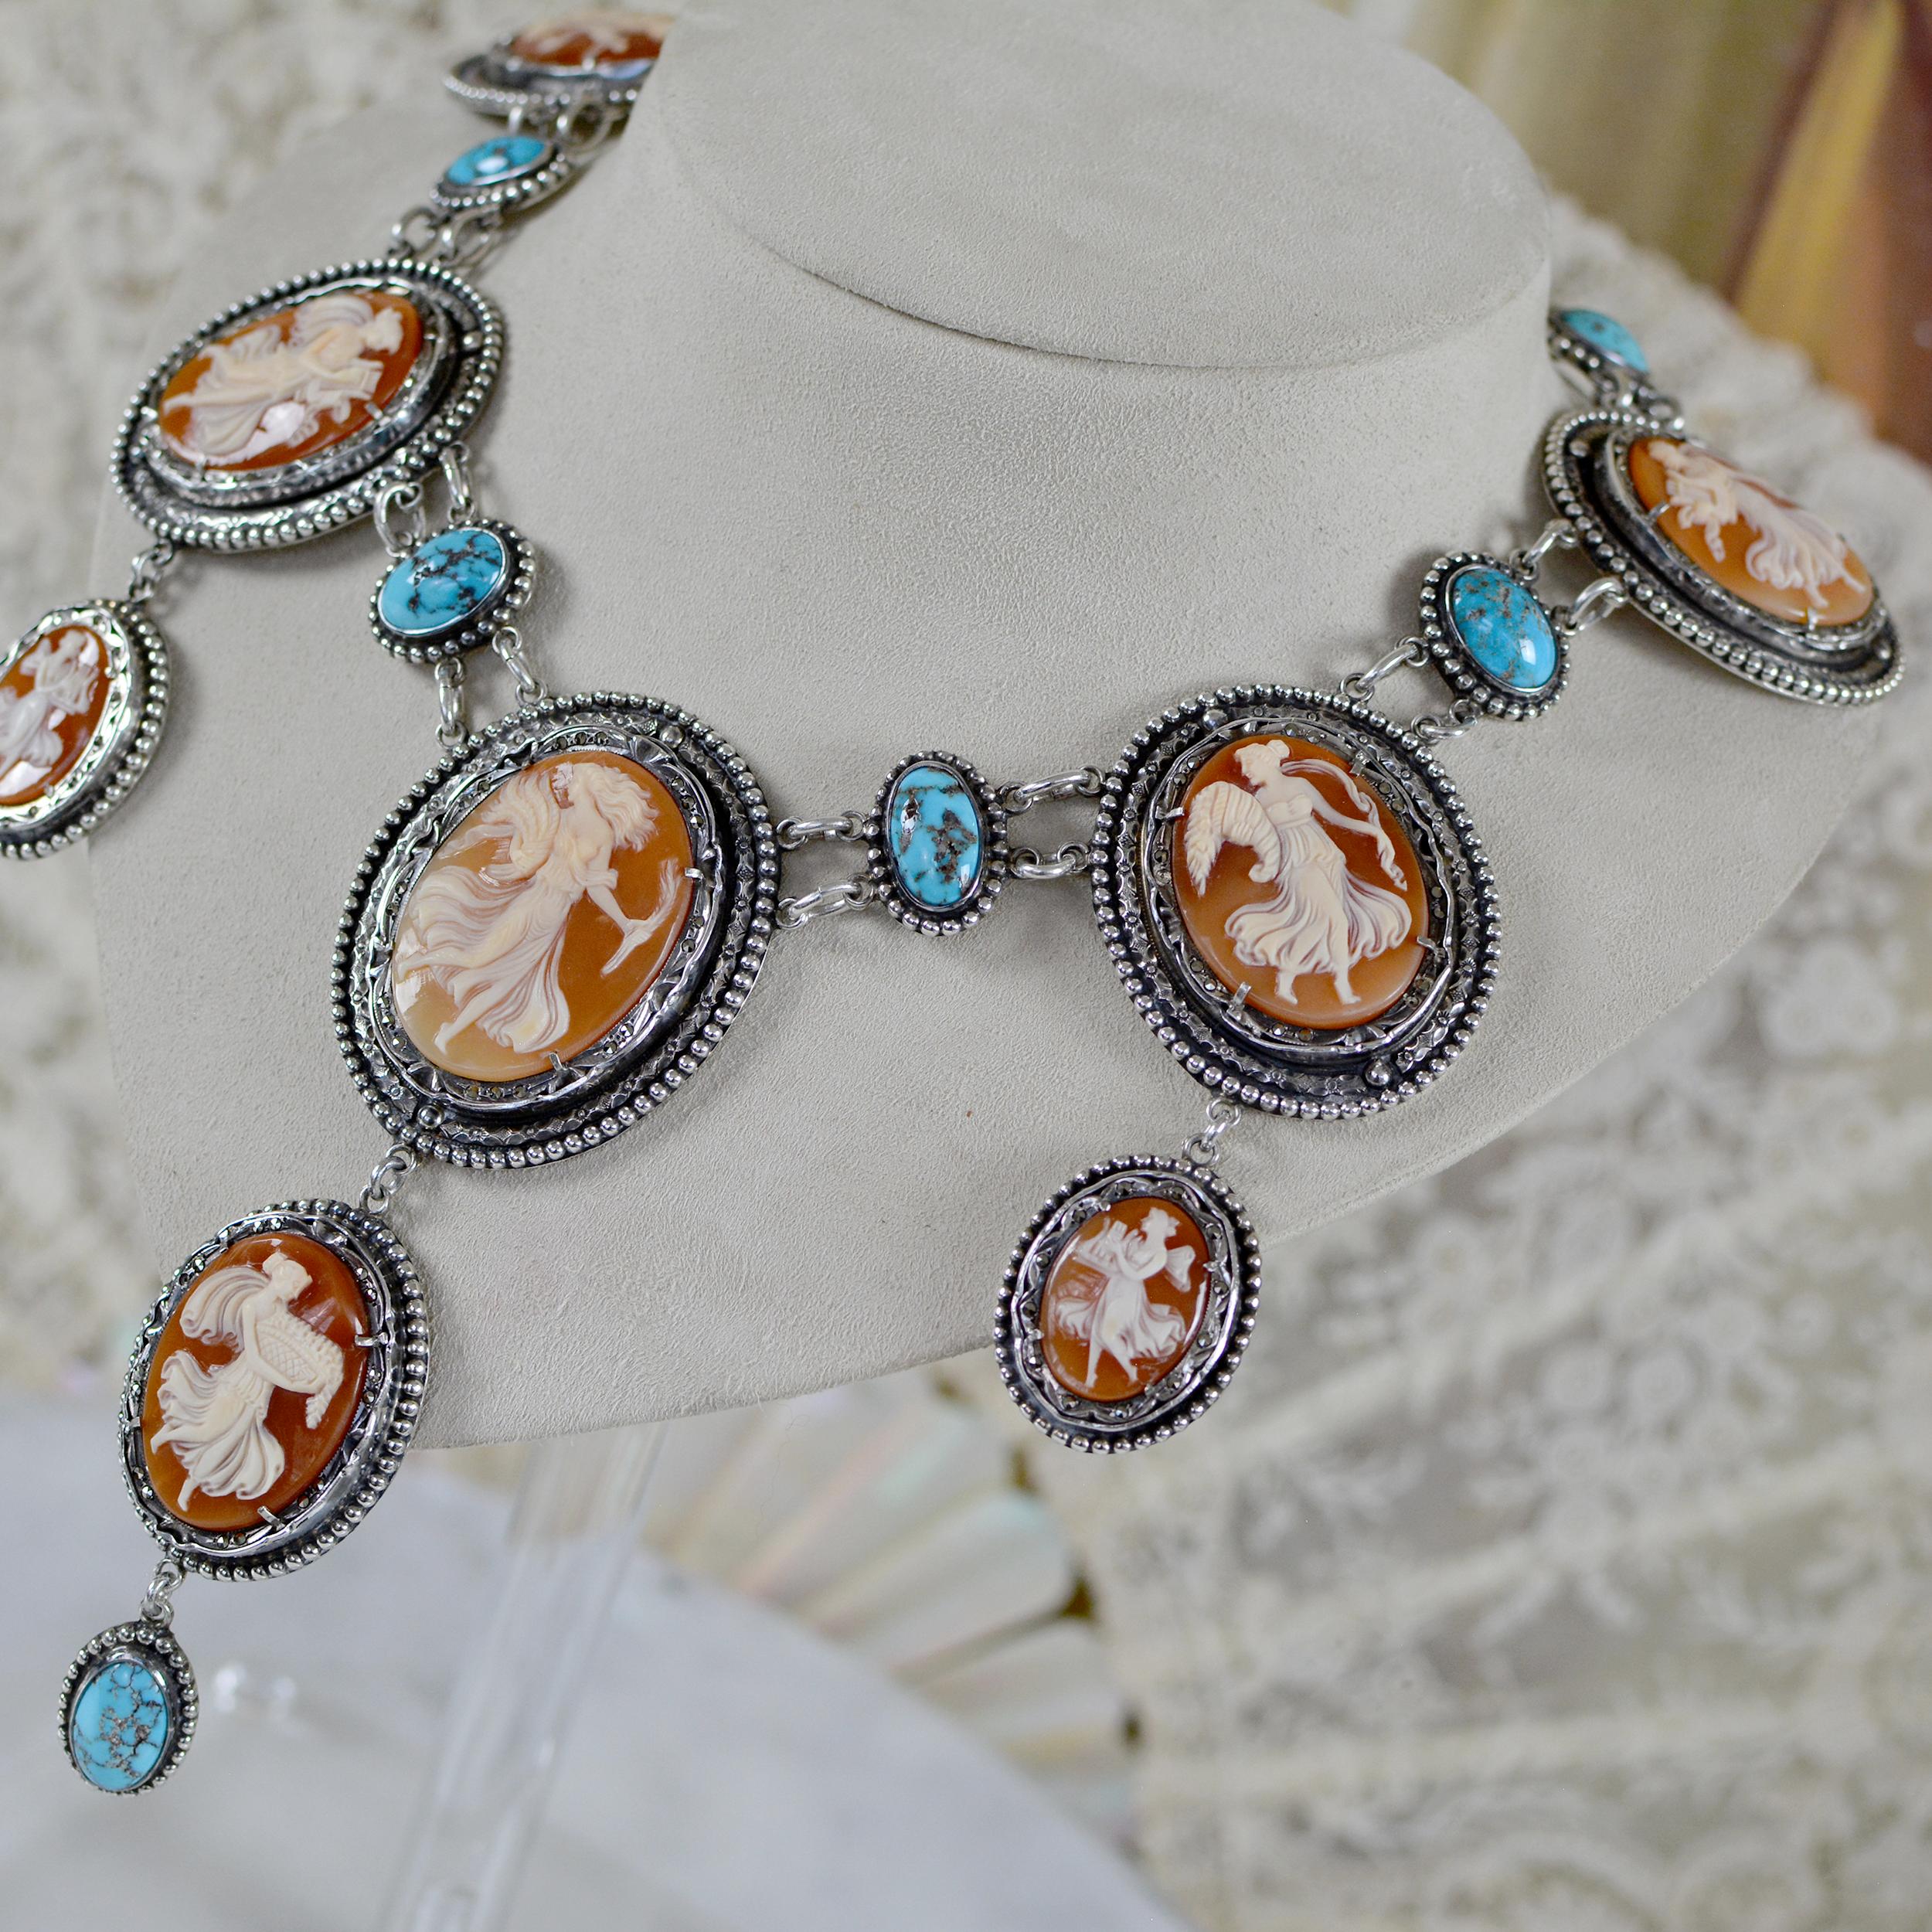 Jill Garber 19th. C. Terpsichore Cameo Suite Necklace with Persian Turquoise  For Sale 2